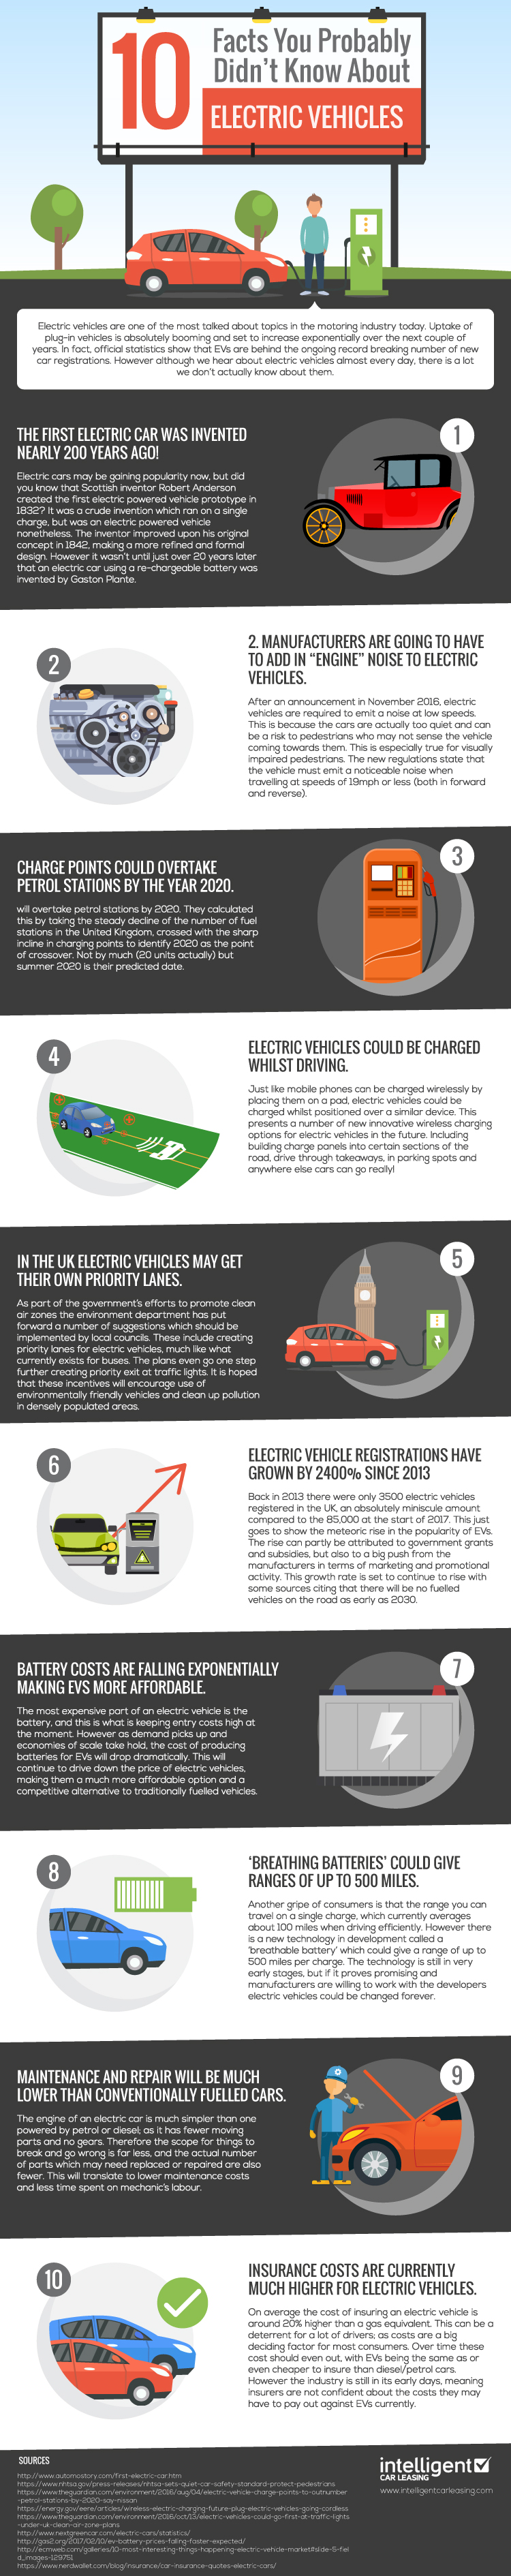 10 facts you probably didn't know about electric vehicles